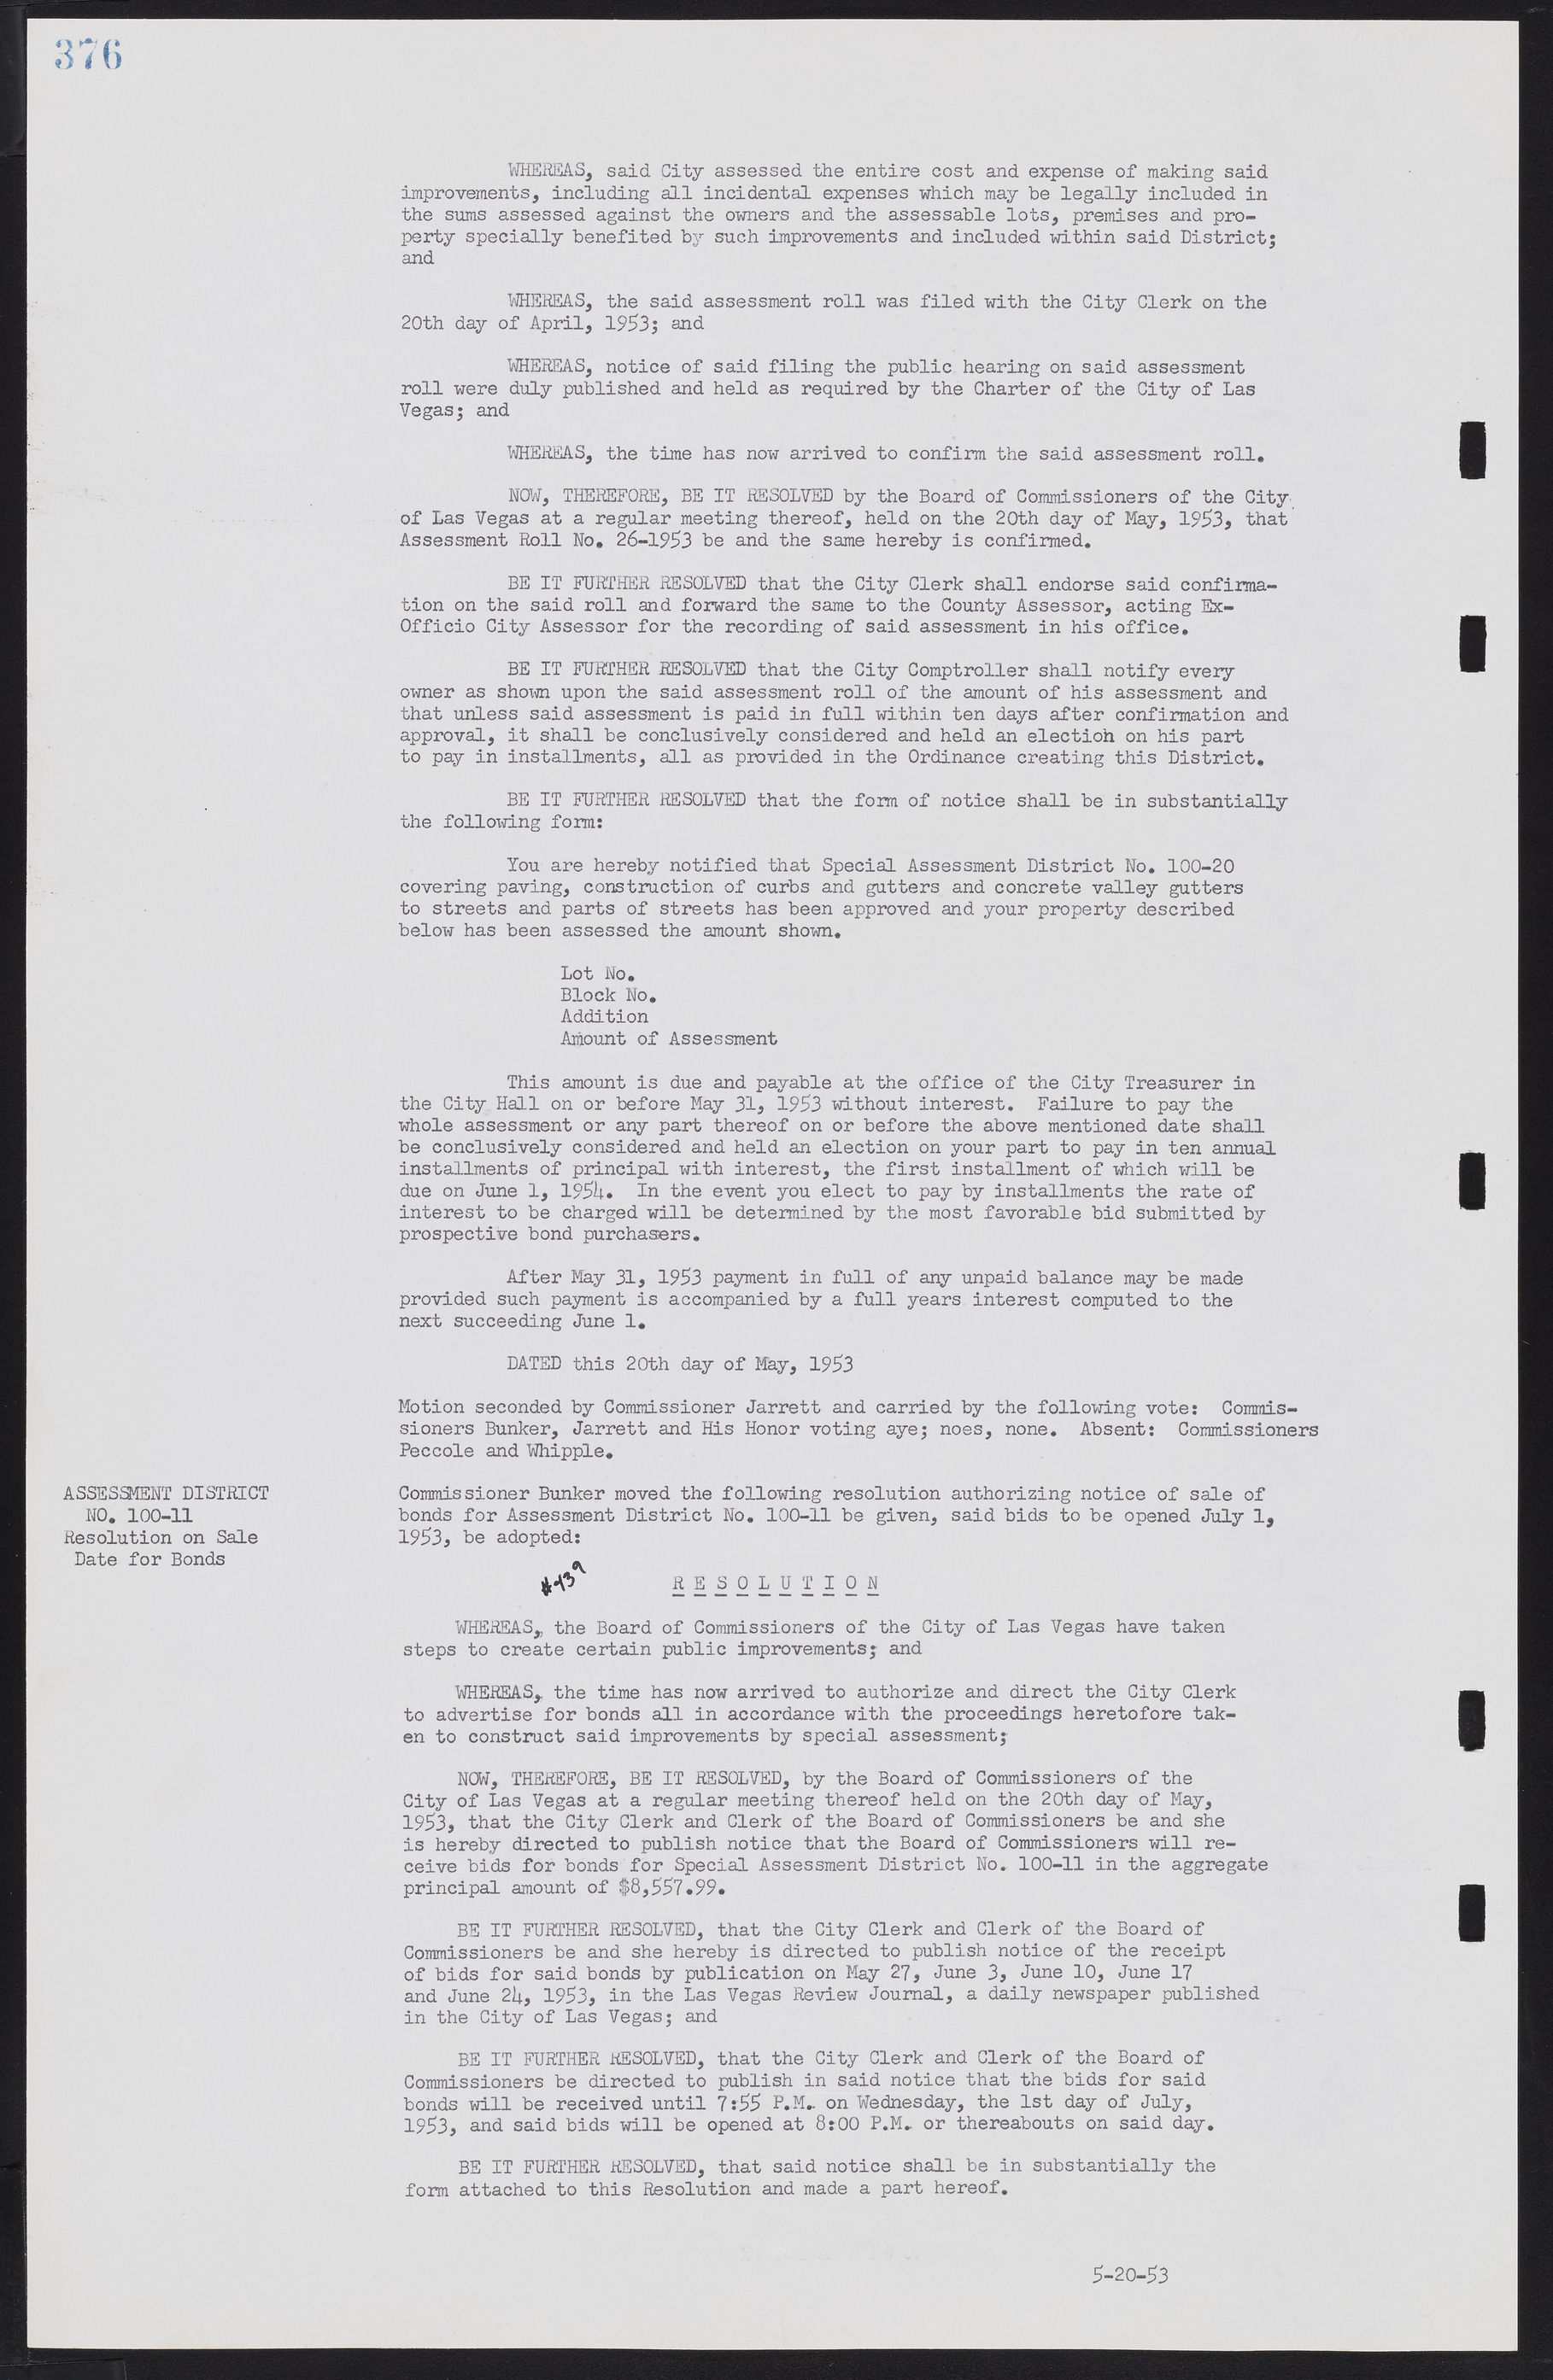 Las Vegas City Commission Minutes, May 26, 1952 to February 17, 1954, lvc000008-404